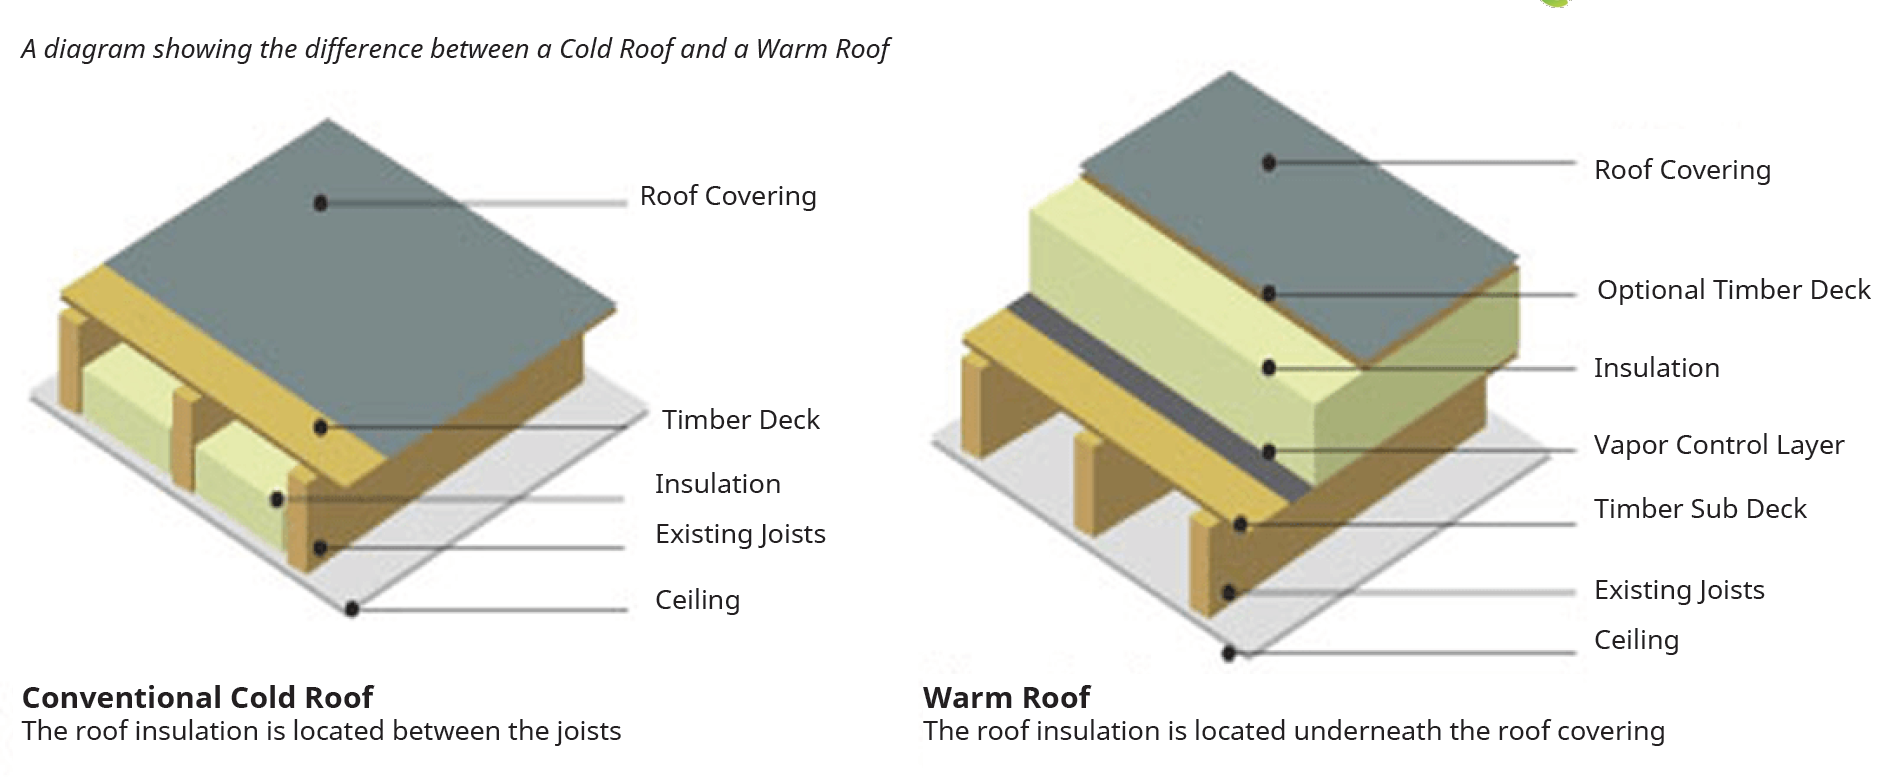 The difference between warm and cold roofs